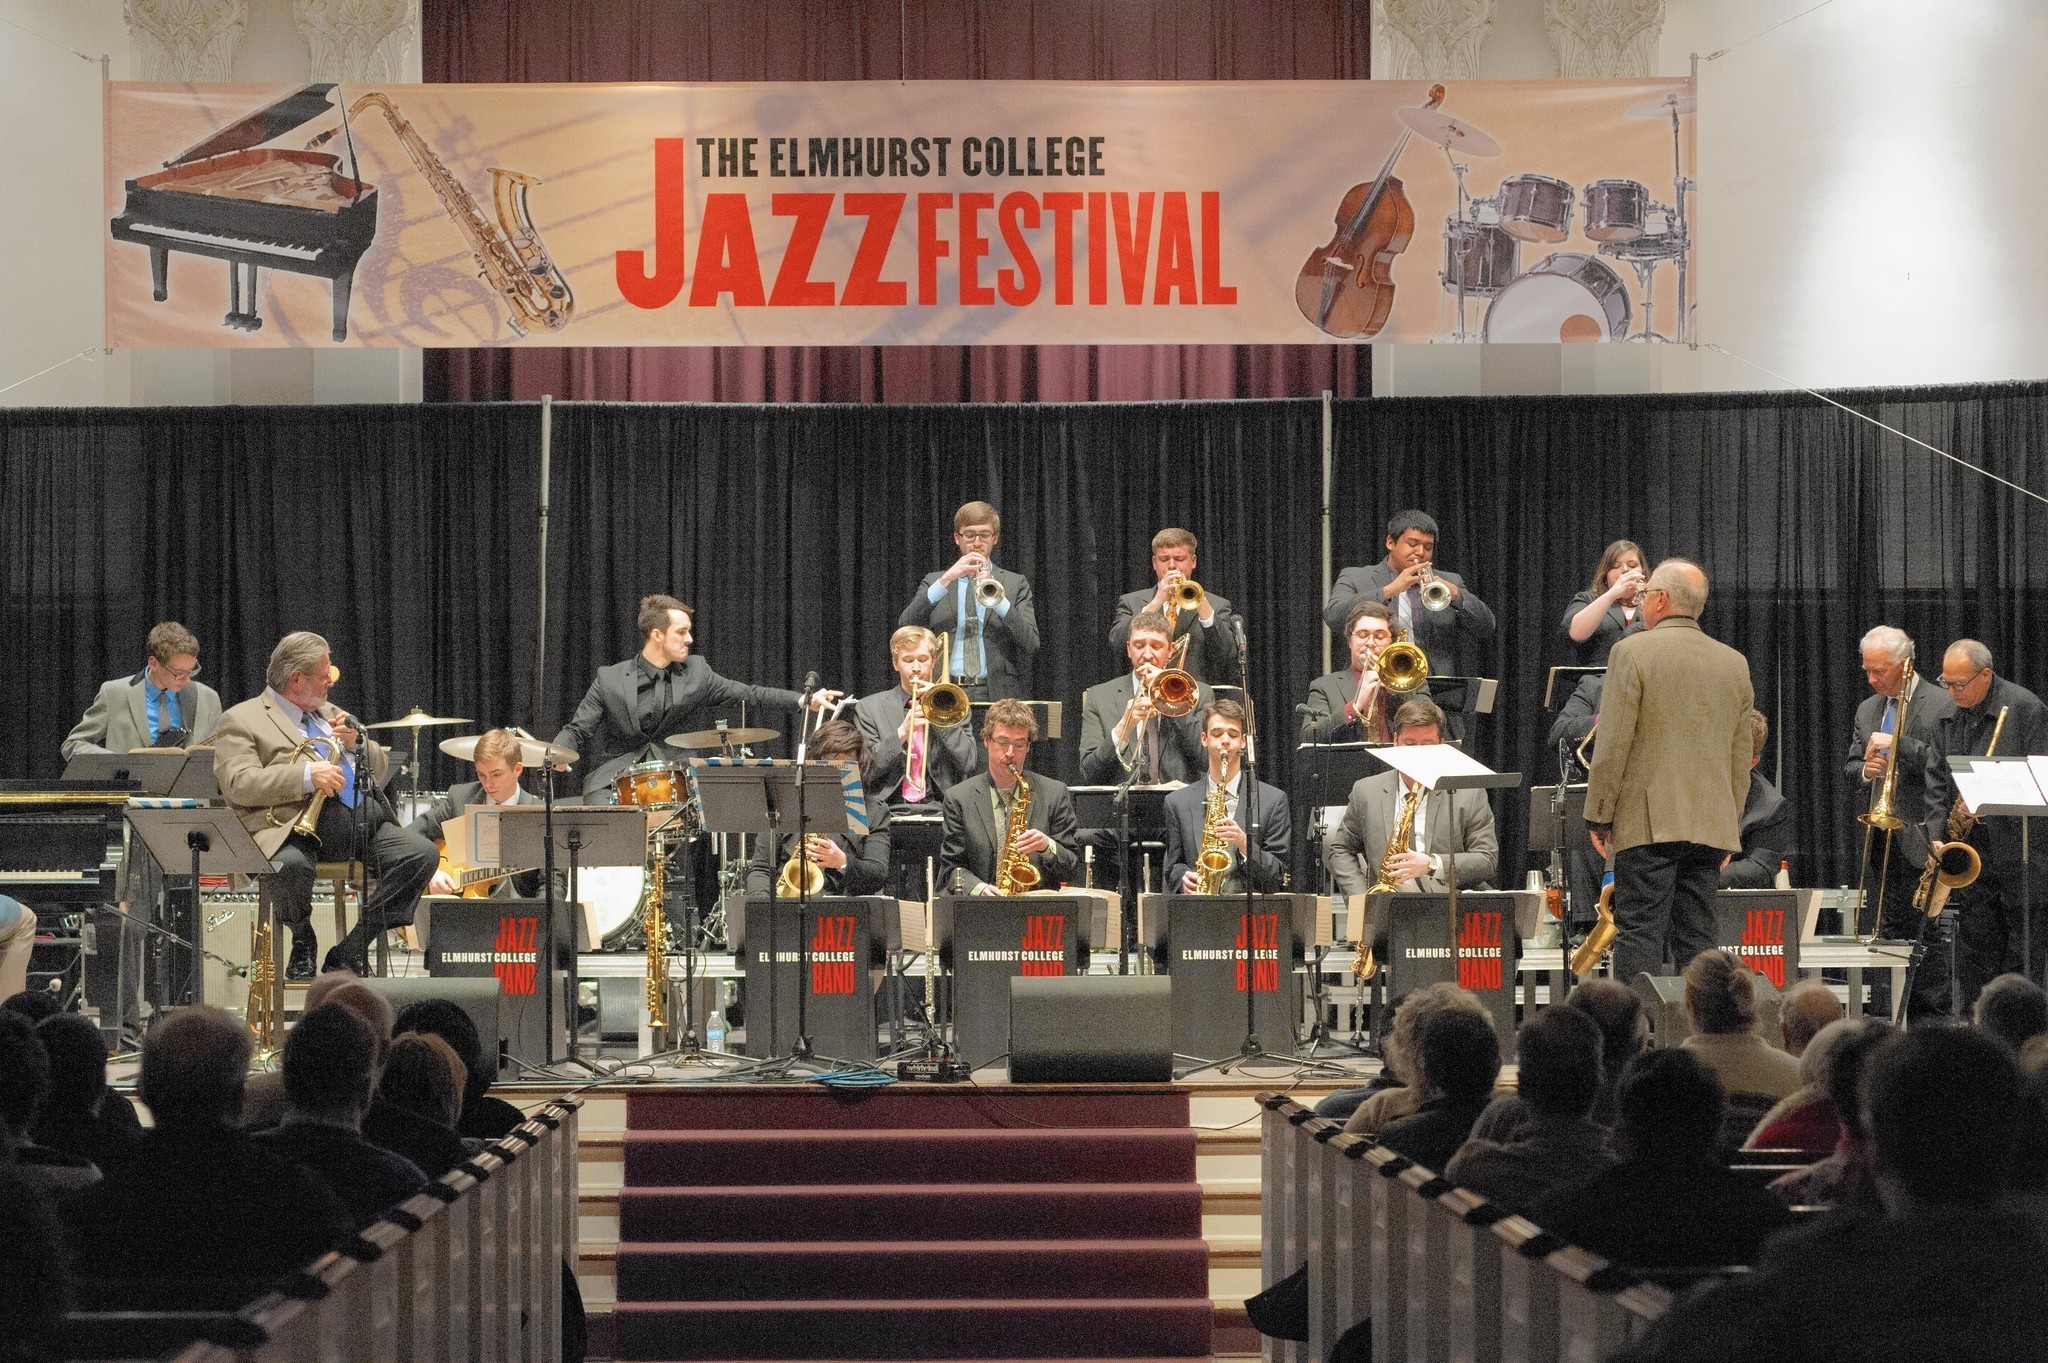 Get Jazzed Up At Chicago’s Elmhurst College Jazz Festival 